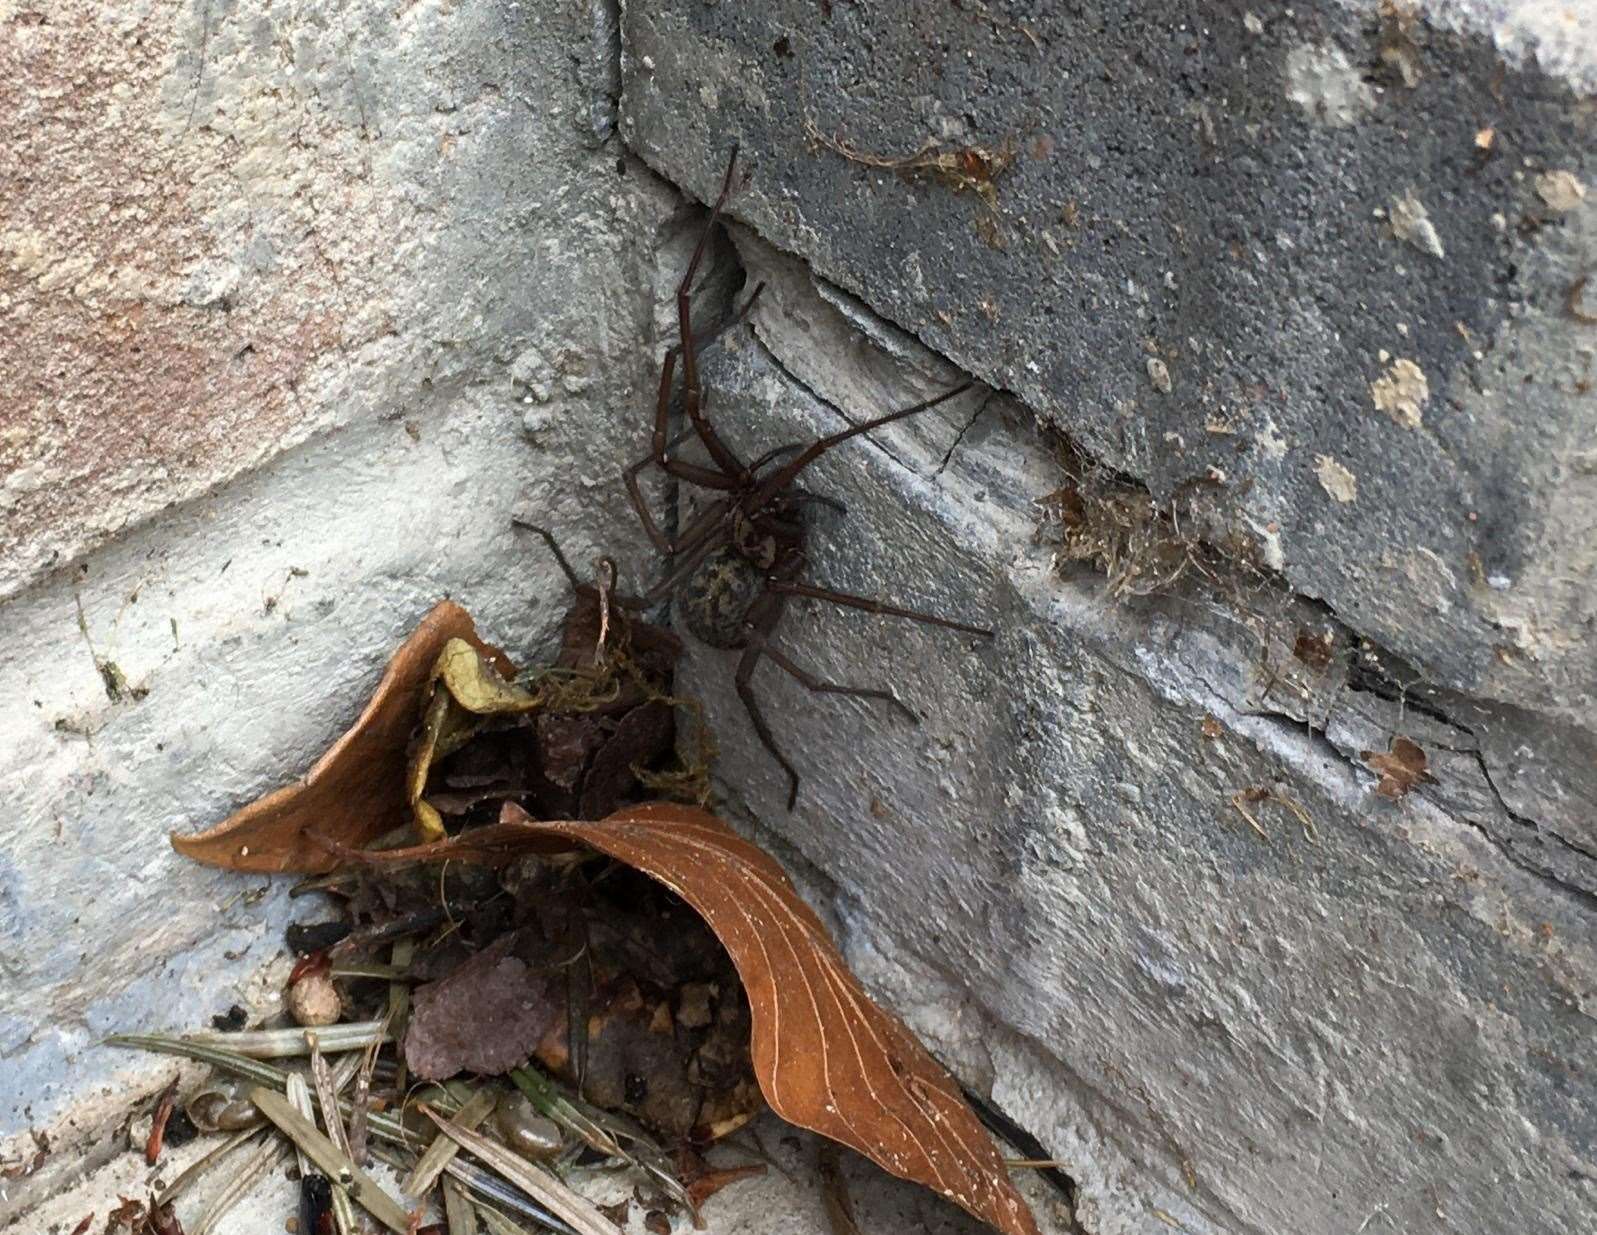 An enormous spider with fangs was spotted in a Rainham garden